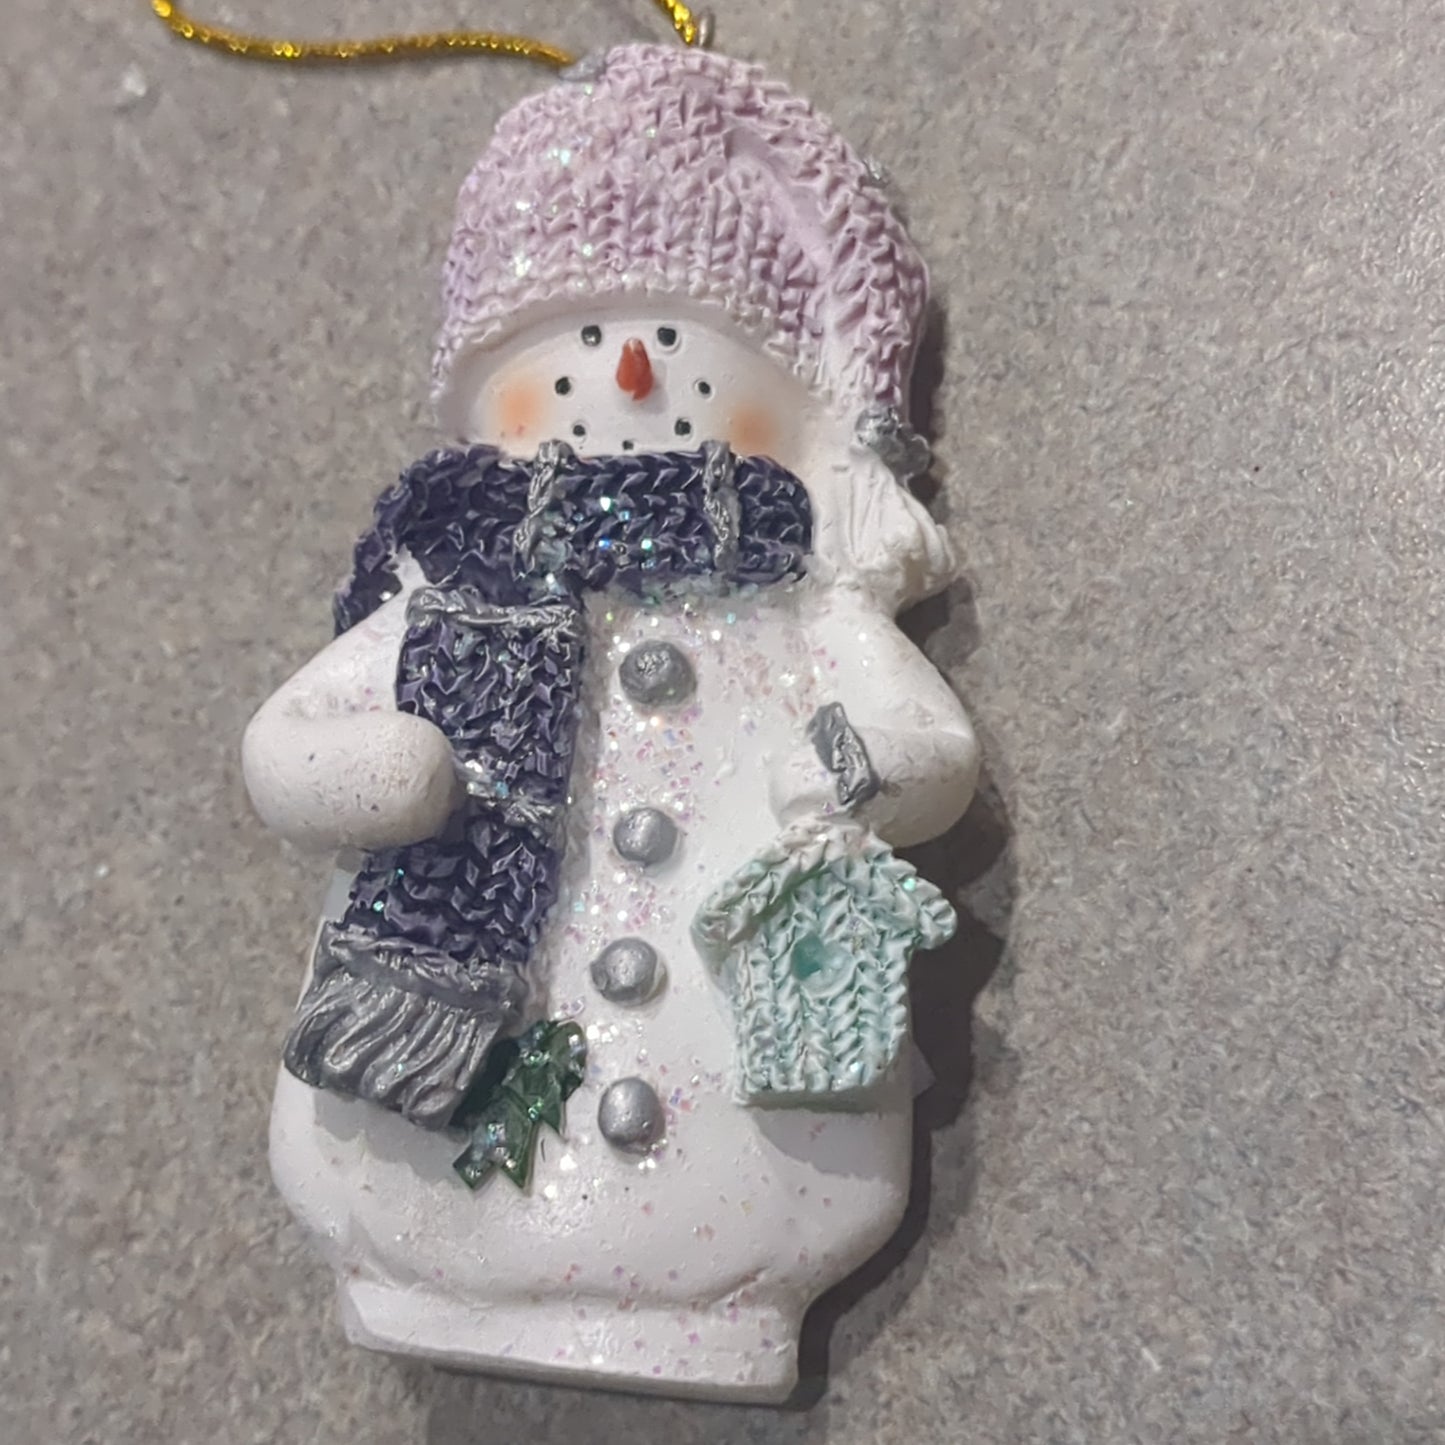 Polycrylic snowman ornament with a birdhouse lilac and purple